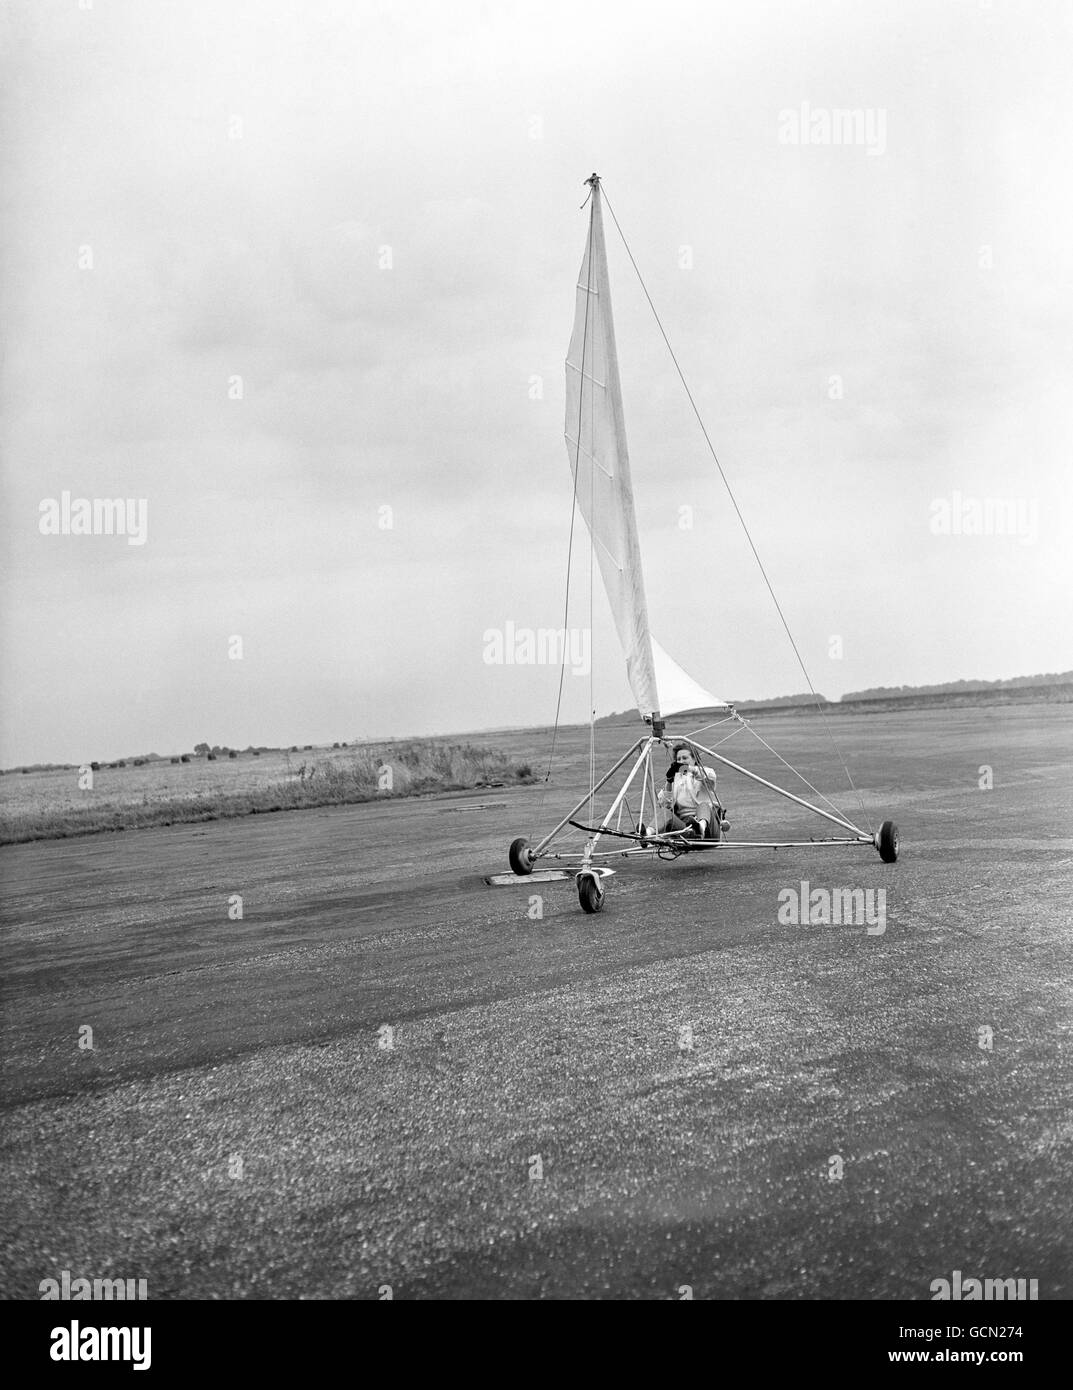 Land Yachting - Britain's Latest Sport - Great Gransden. Mrs. Peter Shelton seen speeding along the runway during a race in one of the later designed models. Stock Photo